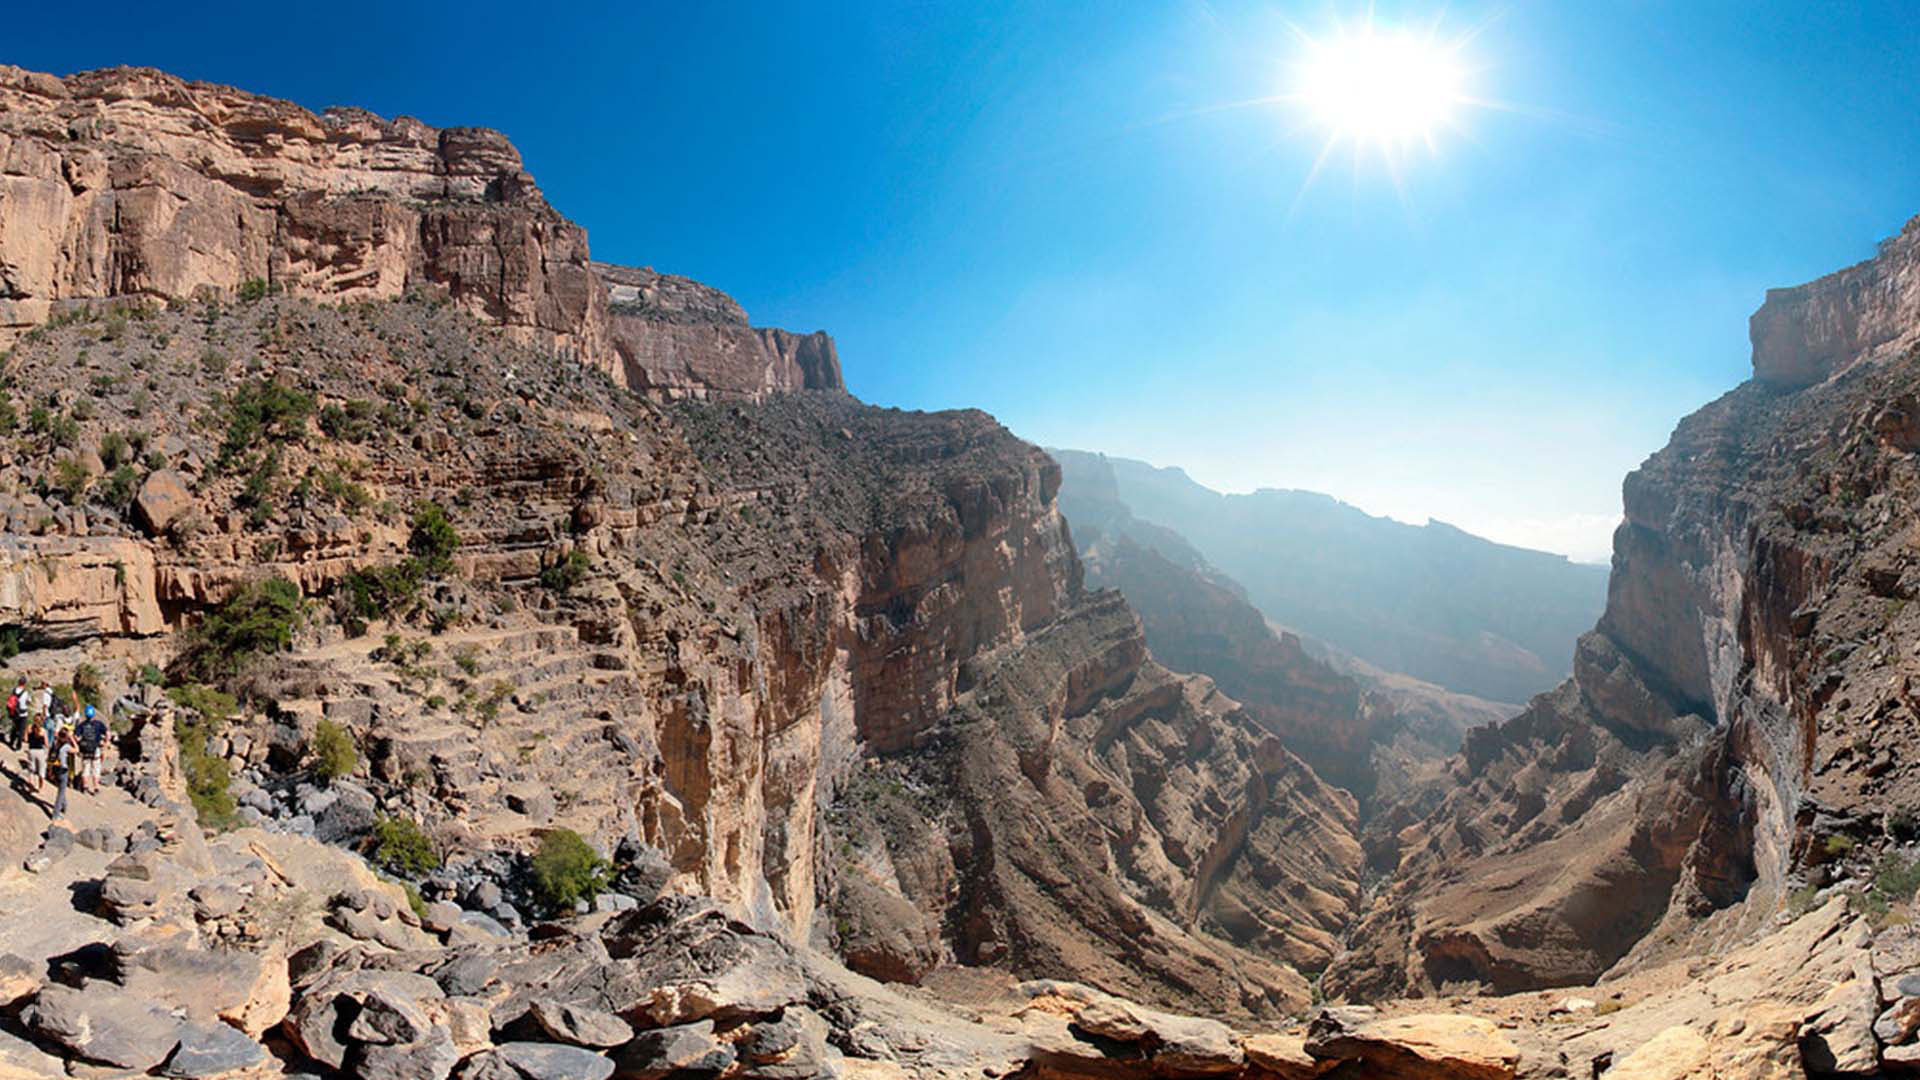 A panoramic photograph captures the eternal magnificence of Jebel Shams, nestled within the Al Hajar mountain range, offering awe-inspiring vistas of a majestic mountain range.